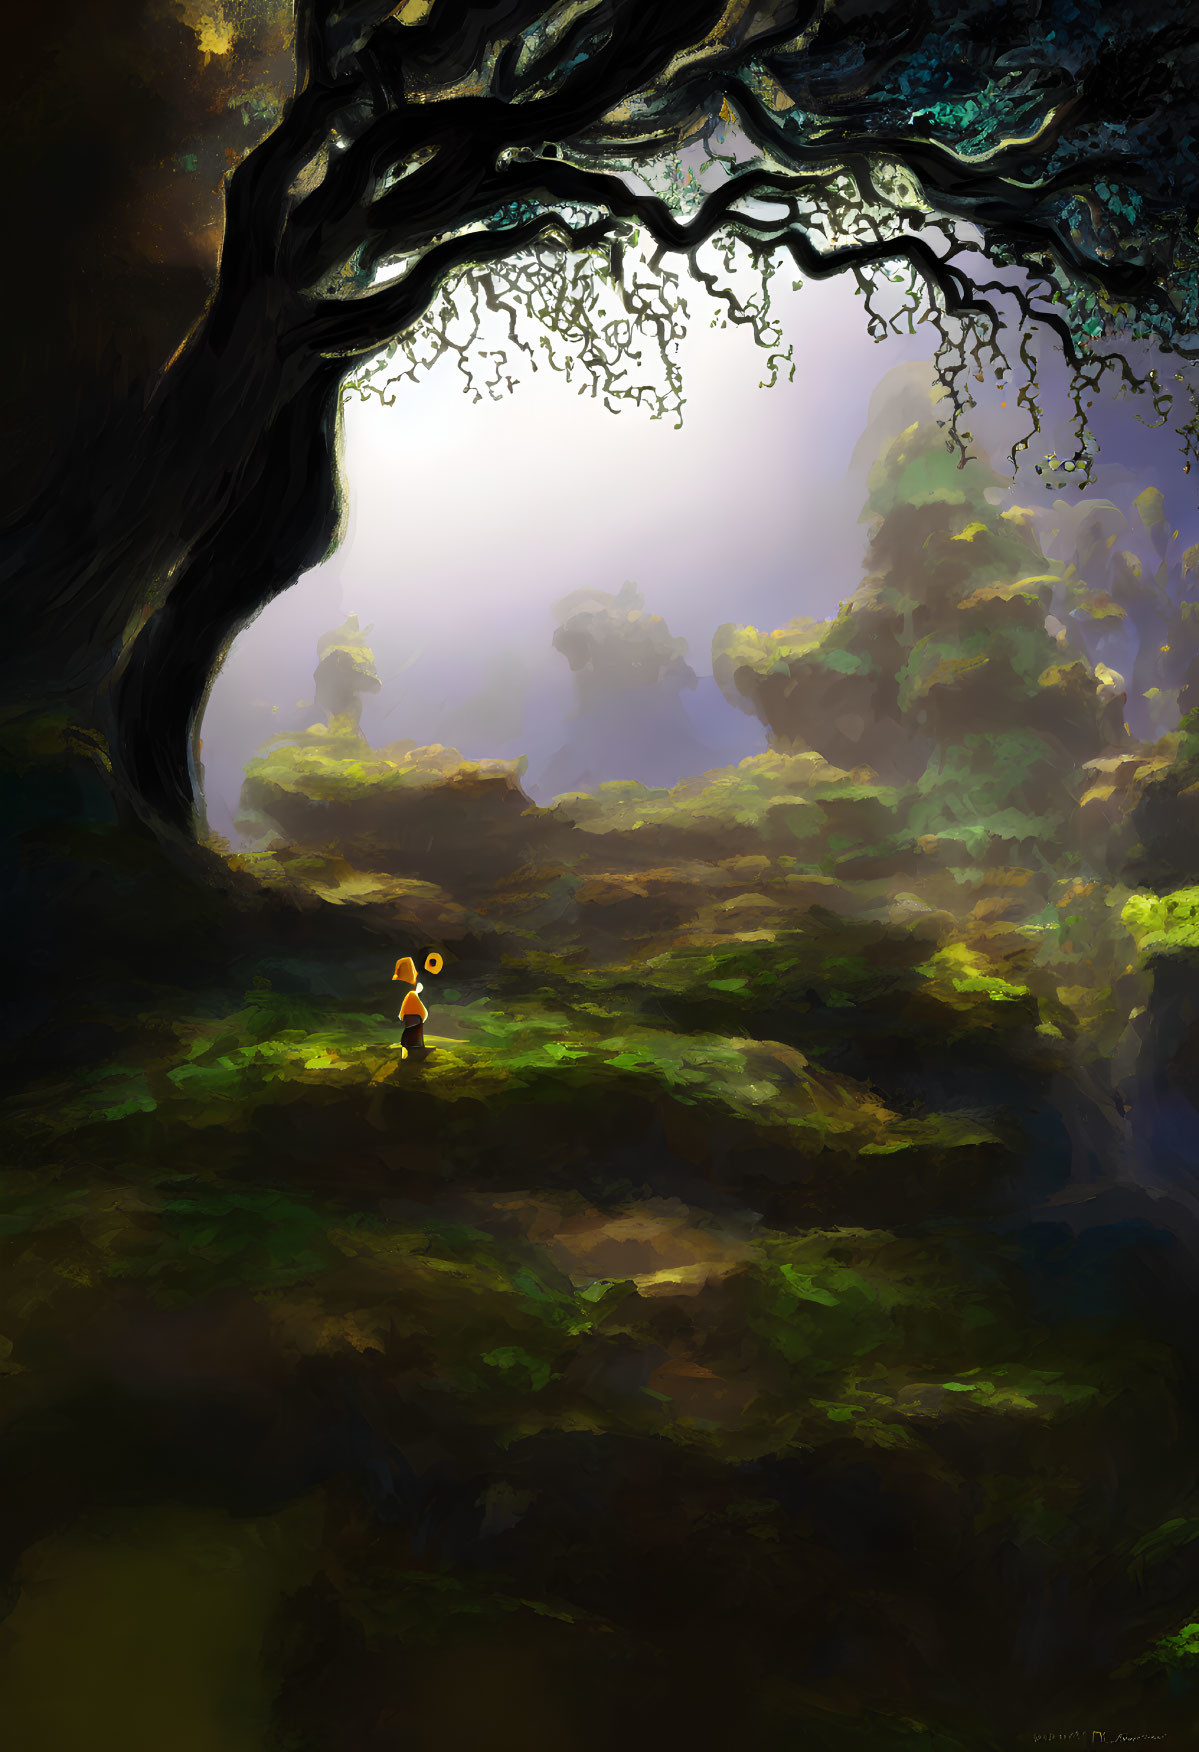 Person in yellow hat under large tree in misty forest with sunlight.